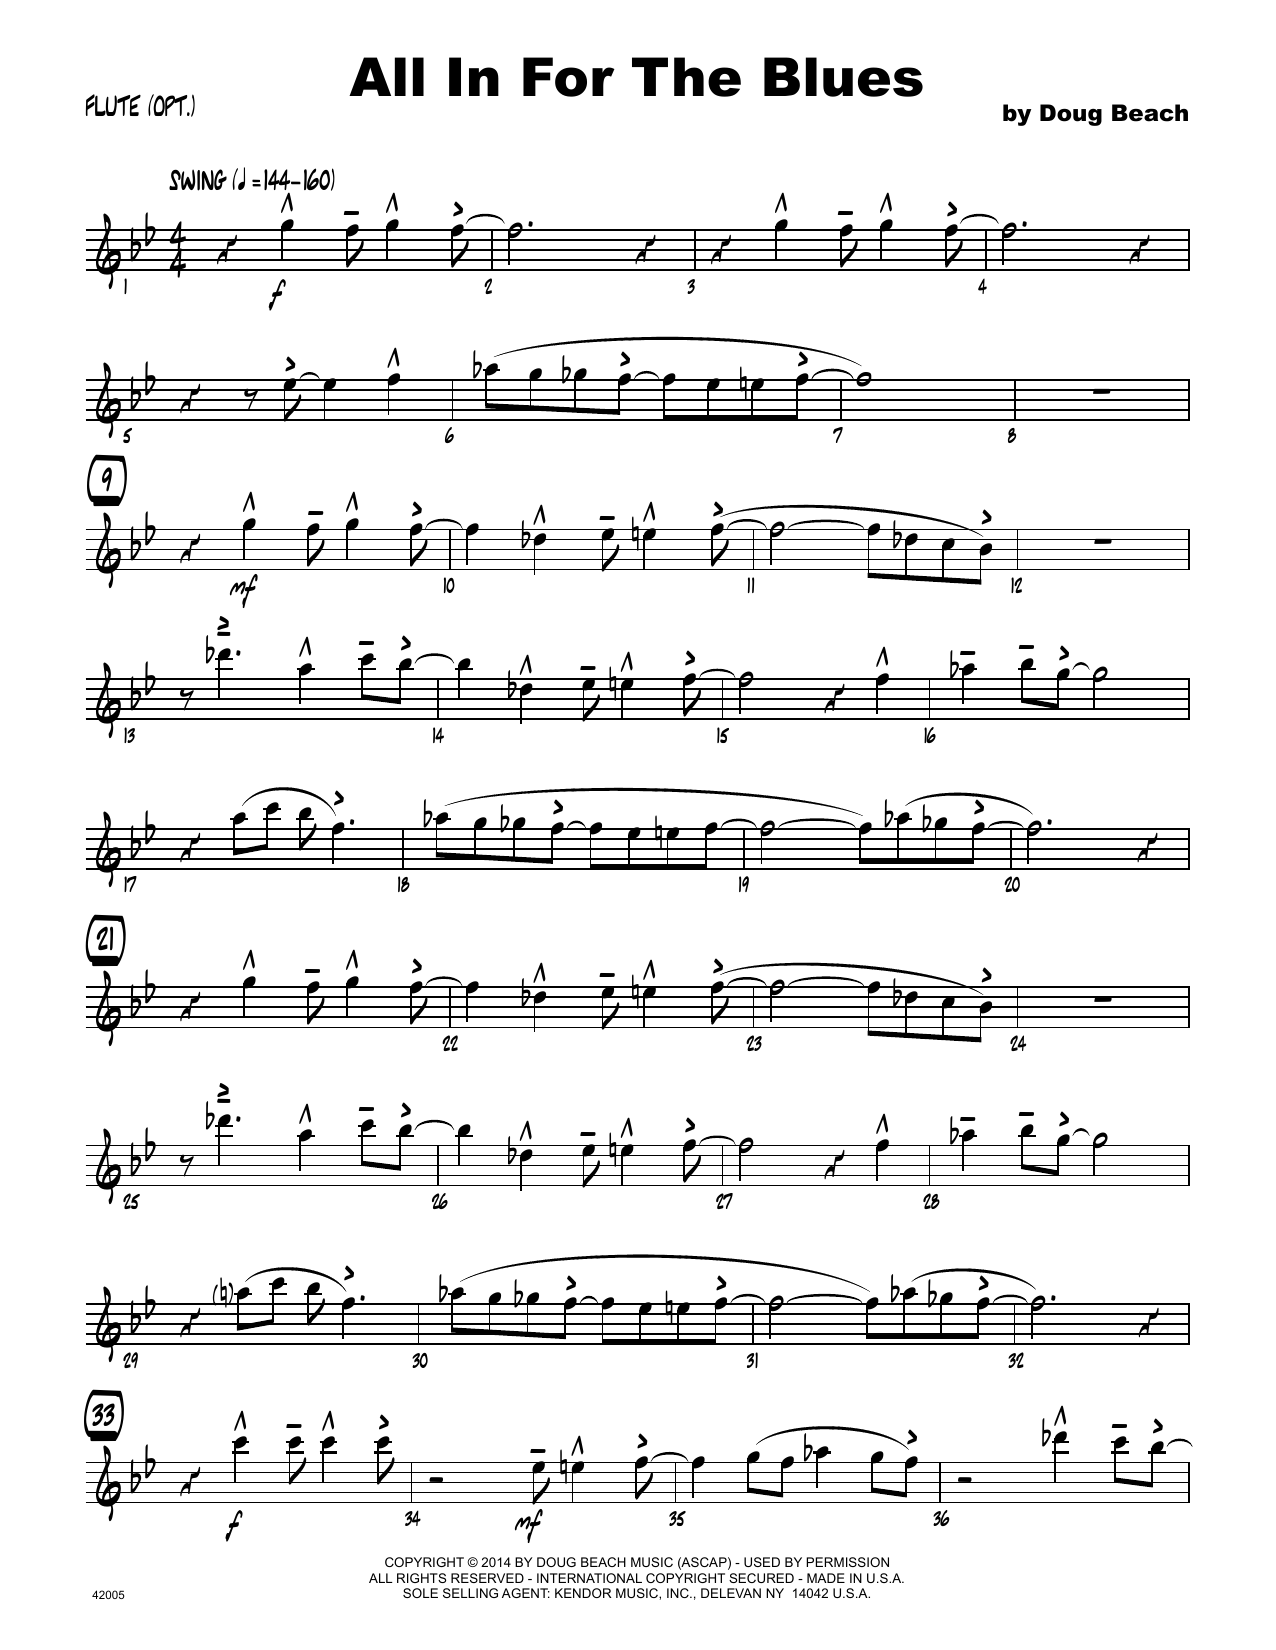 Download Doug Beach All In For The Blues - Flute Sheet Music